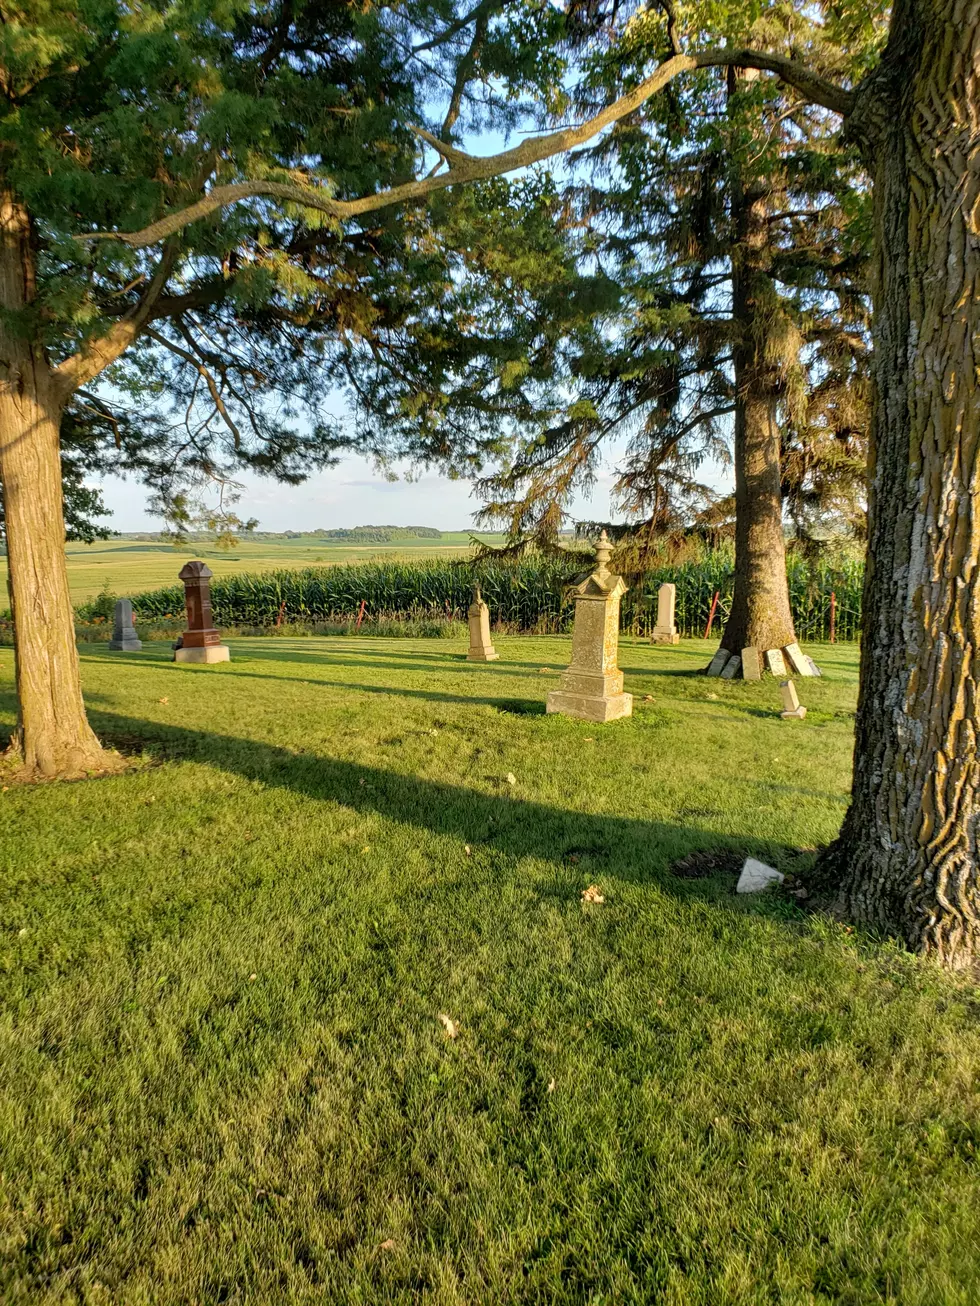 Our Unplanned Trip To This Rice County Cemetery